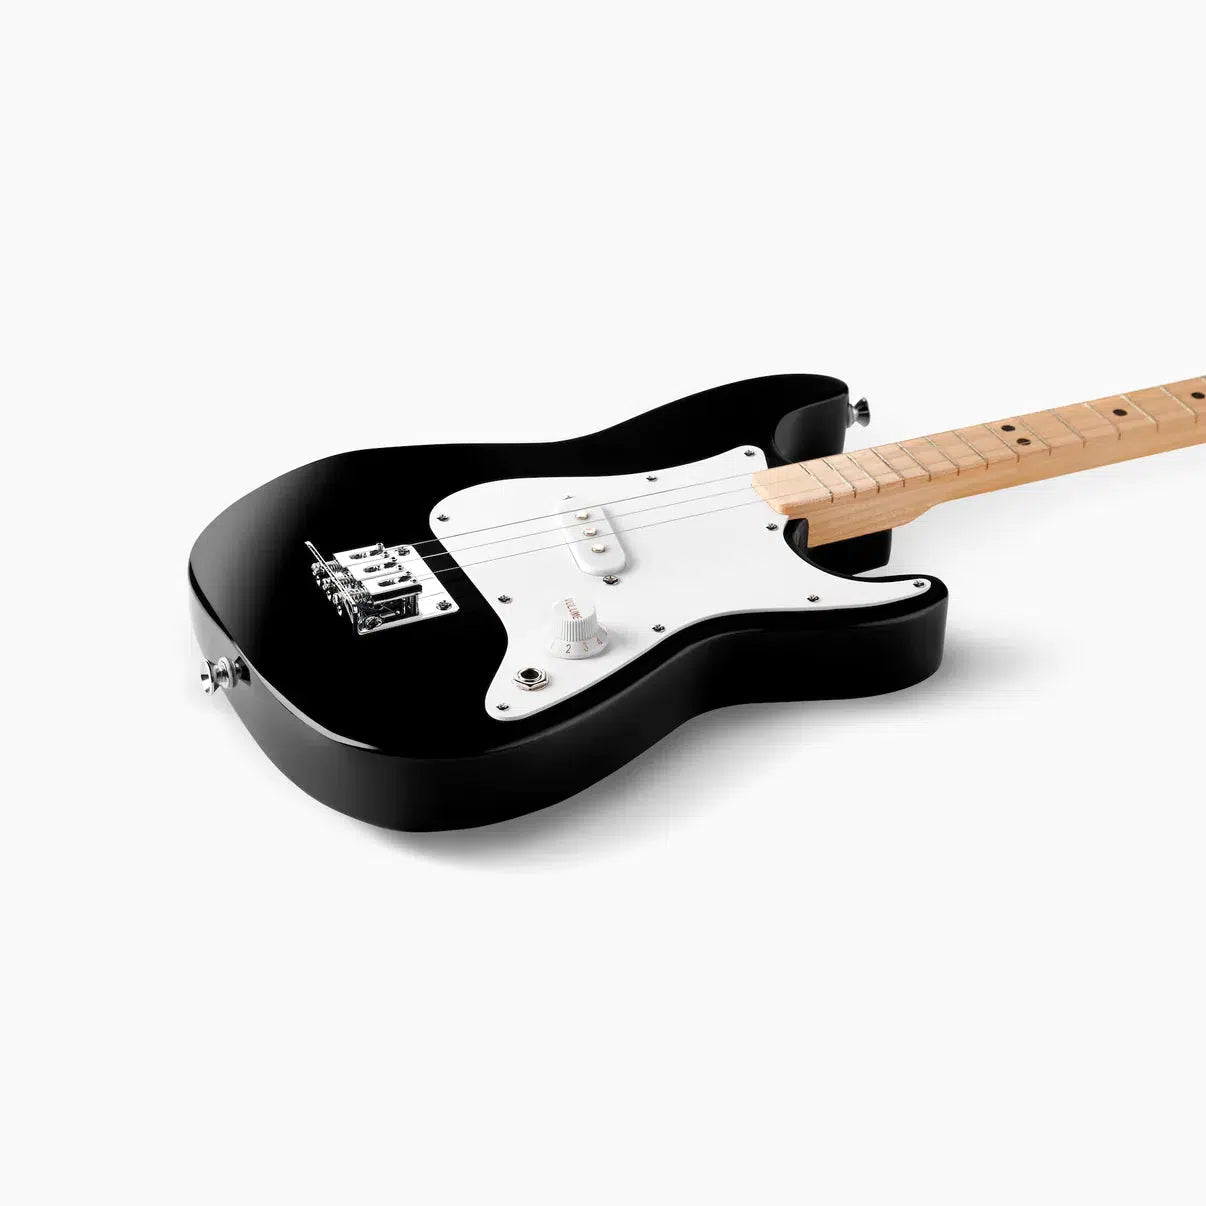 Front view of the Fender X Loog guitar against a white background.